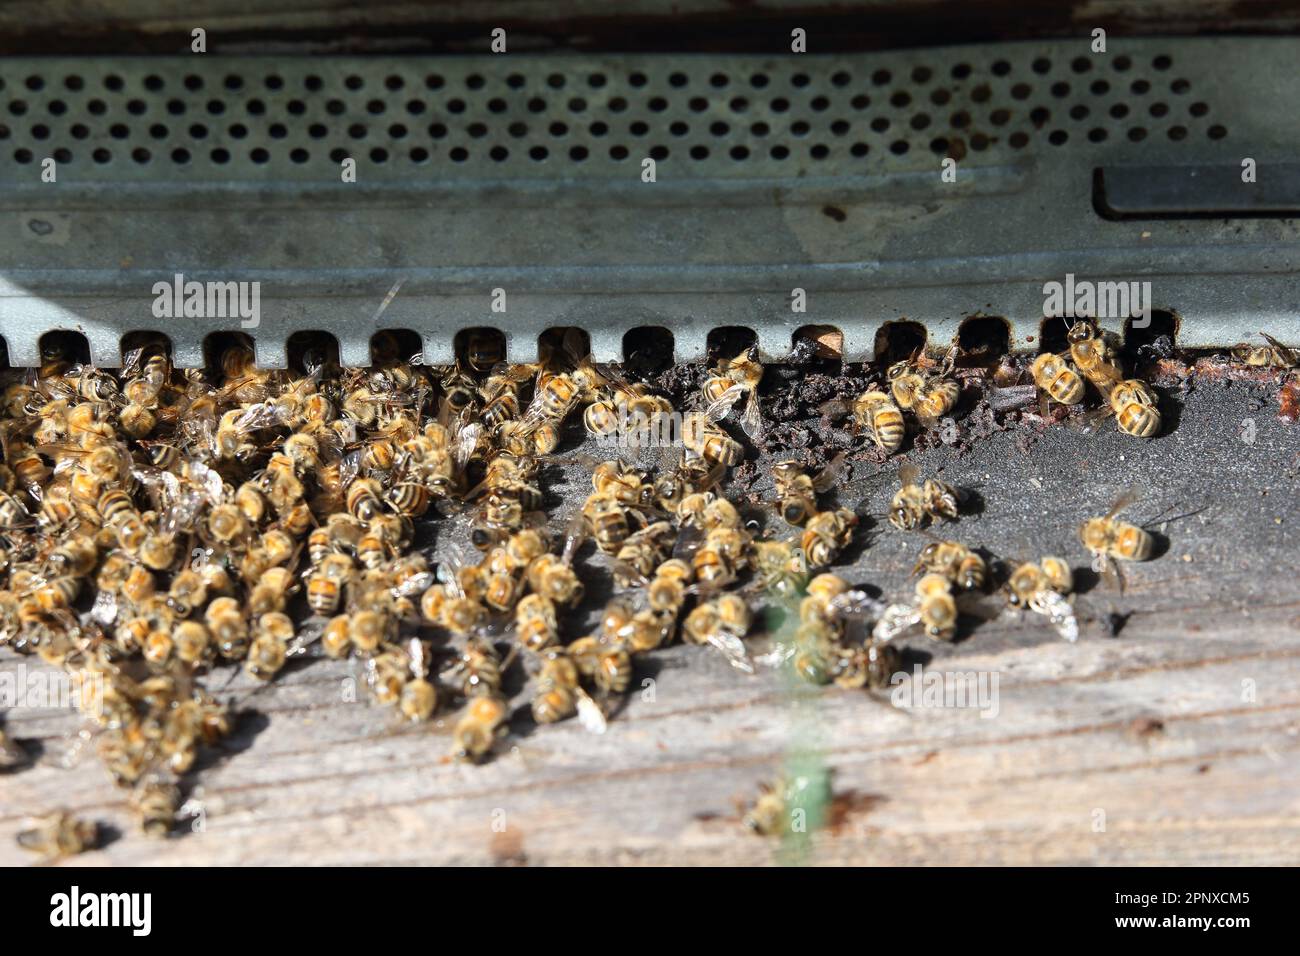 beekeeping and pollution, bee death Stock Photo